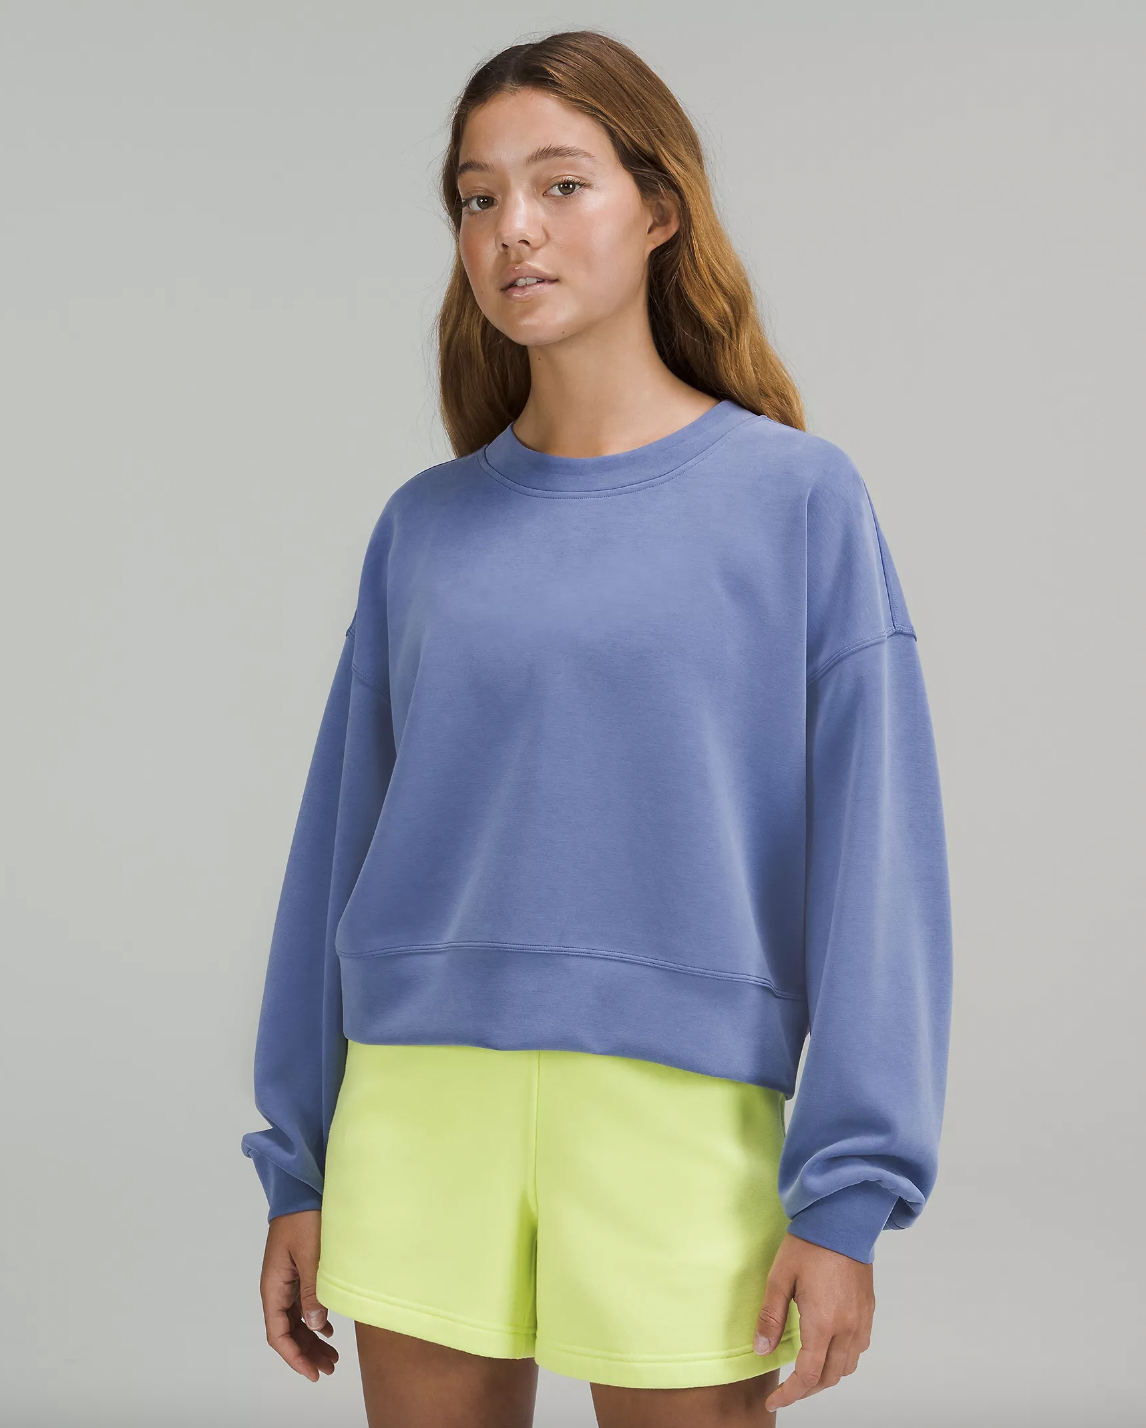 a person wearing the slouchy sweatshirt with a pair of shorts